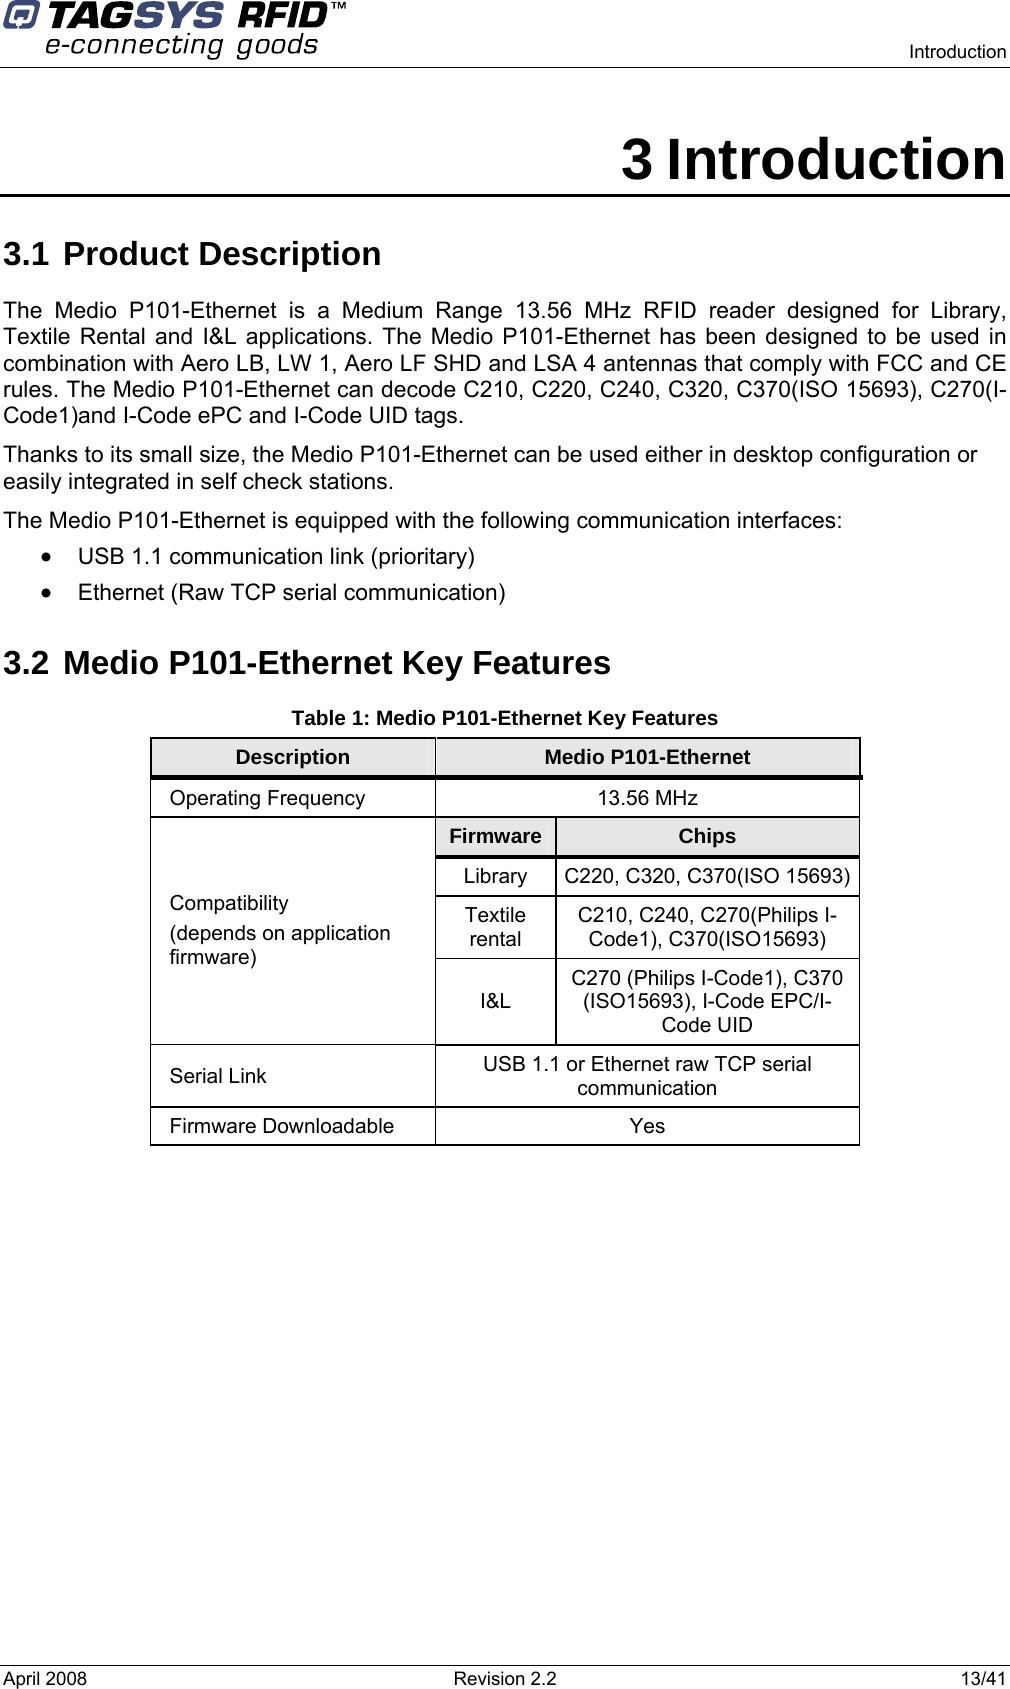    Introduction  April 2008  Revision 2.2  13/41 3 Introduction 3.1 Product Description The Medio P101-Ethernet is a Medium Range 13.56 MHz RFID reader designed for Library, Textile Rental and I&amp;L applications. The Medio P101-Ethernet has been designed to be used in combination with Aero LB, LW 1, Aero LF SHD and LSA 4 antennas that comply with FCC and CE rules. The Medio P101-Ethernet can decode C210, C220, C240, C320, C370(ISO 15693), C270(I-Code1)and I-Code ePC and I-Code UID tags. Thanks to its small size, the Medio P101-Ethernet can be used either in desktop configuration or easily integrated in self check stations. The Medio P101-Ethernet is equipped with the following communication interfaces: • USB 1.1 communication link (prioritary) • Ethernet (Raw TCP serial communication) 3.2 Medio P101-Ethernet Key Features Table 1: Medio P101-Ethernet Key Features Description  Medio P101-Ethernet Operating Frequency  13.56 MHz Firmware  Chips Library  C220, C320, C370(ISO 15693) Textile rental C210, C240, C270(Philips I-Code1), C370(ISO15693) Compatibility  (depends on application firmware) I&amp;L C270 (Philips I-Code1), C370 (ISO15693), I-Code EPC/I-Code UID Serial Link  USB 1.1 or Ethernet raw TCP serial communication Firmware Downloadable  Yes  